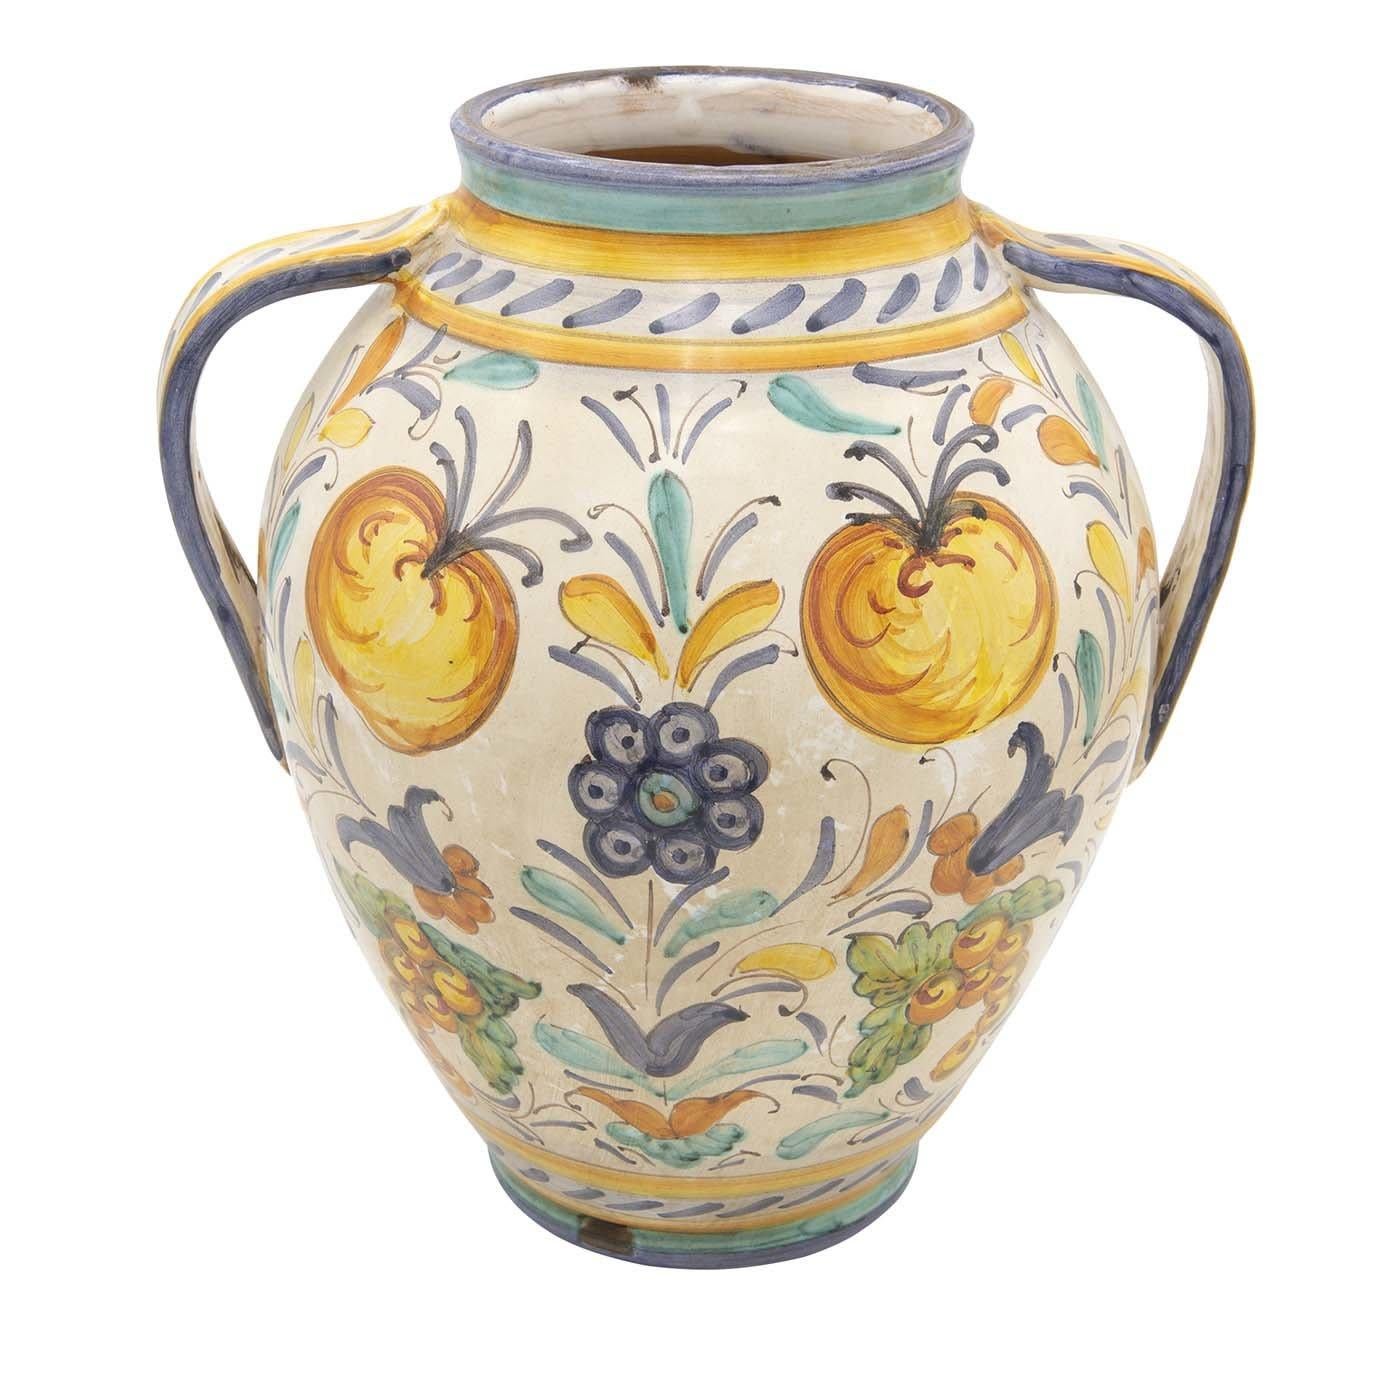 A stunning objet d'art, this vase was entirely crafted by hand of ceramic by master artisan Lorenza Adami. Expression of the iconic tradition of Renaissance pottery, this vase showcases delicate curves, two handles, and a superb hand-applied